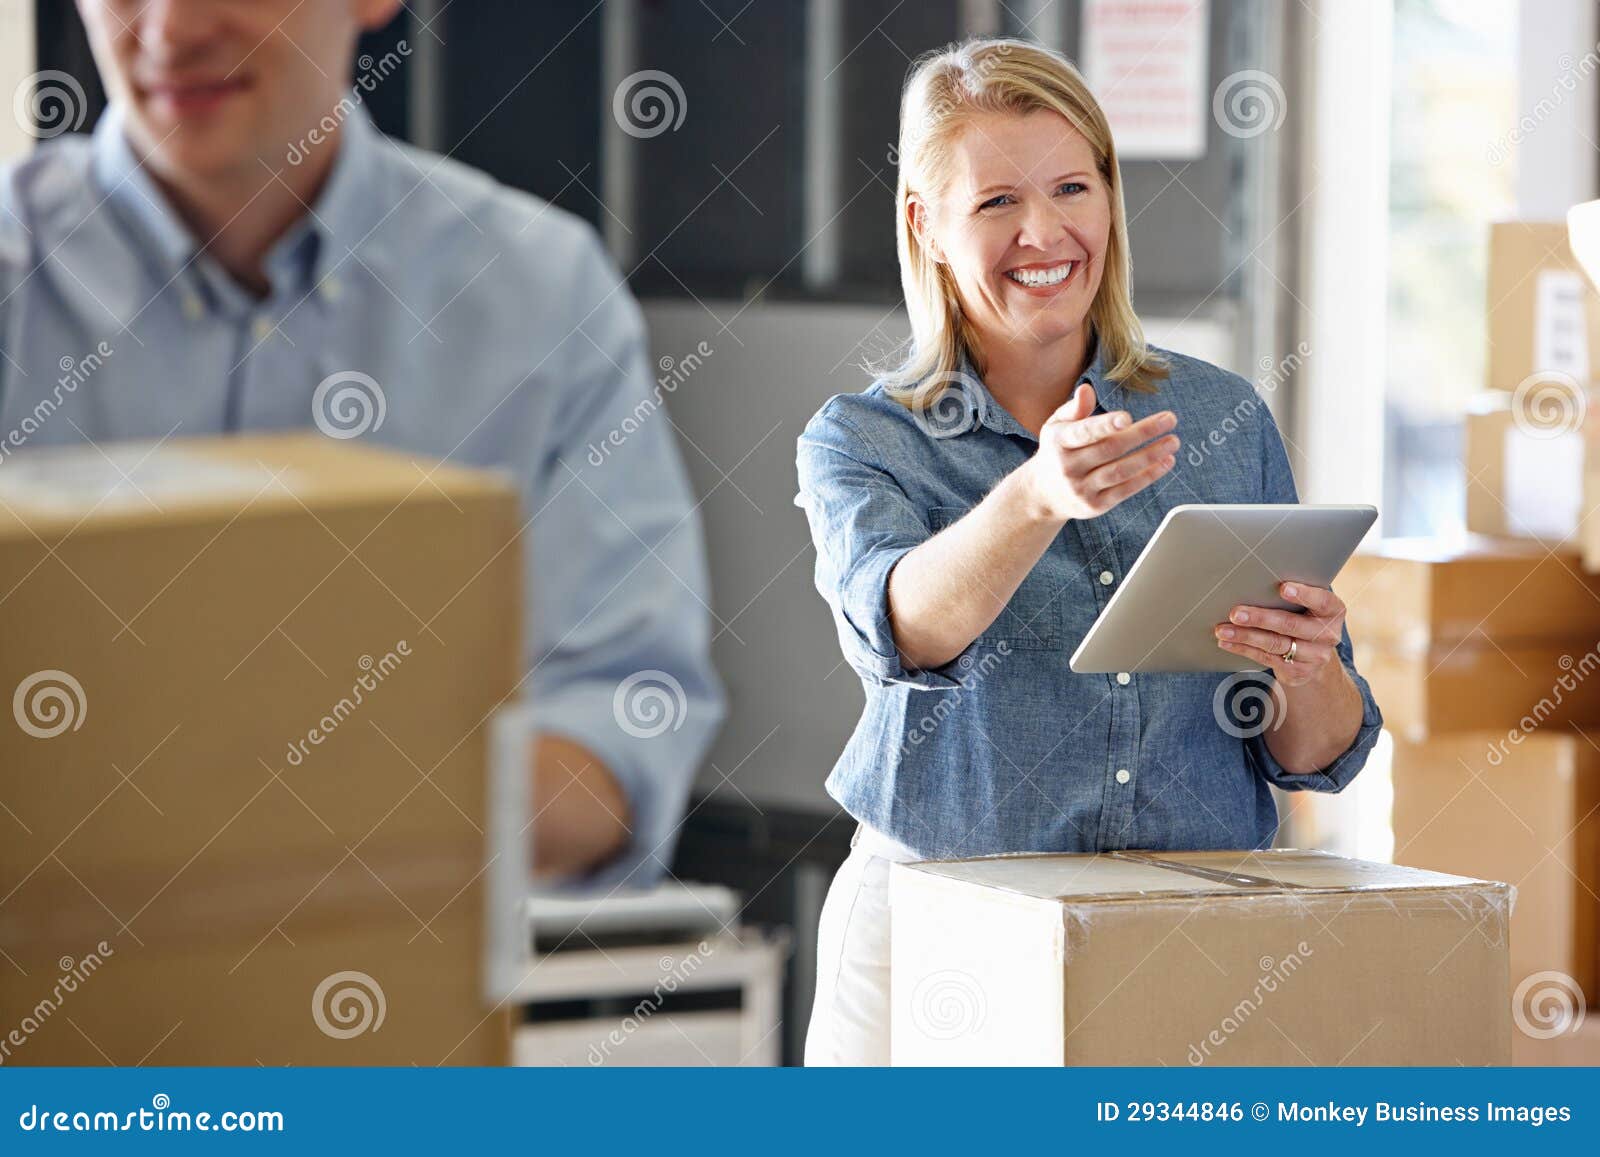 manager using tablet computer in distribution warehouse